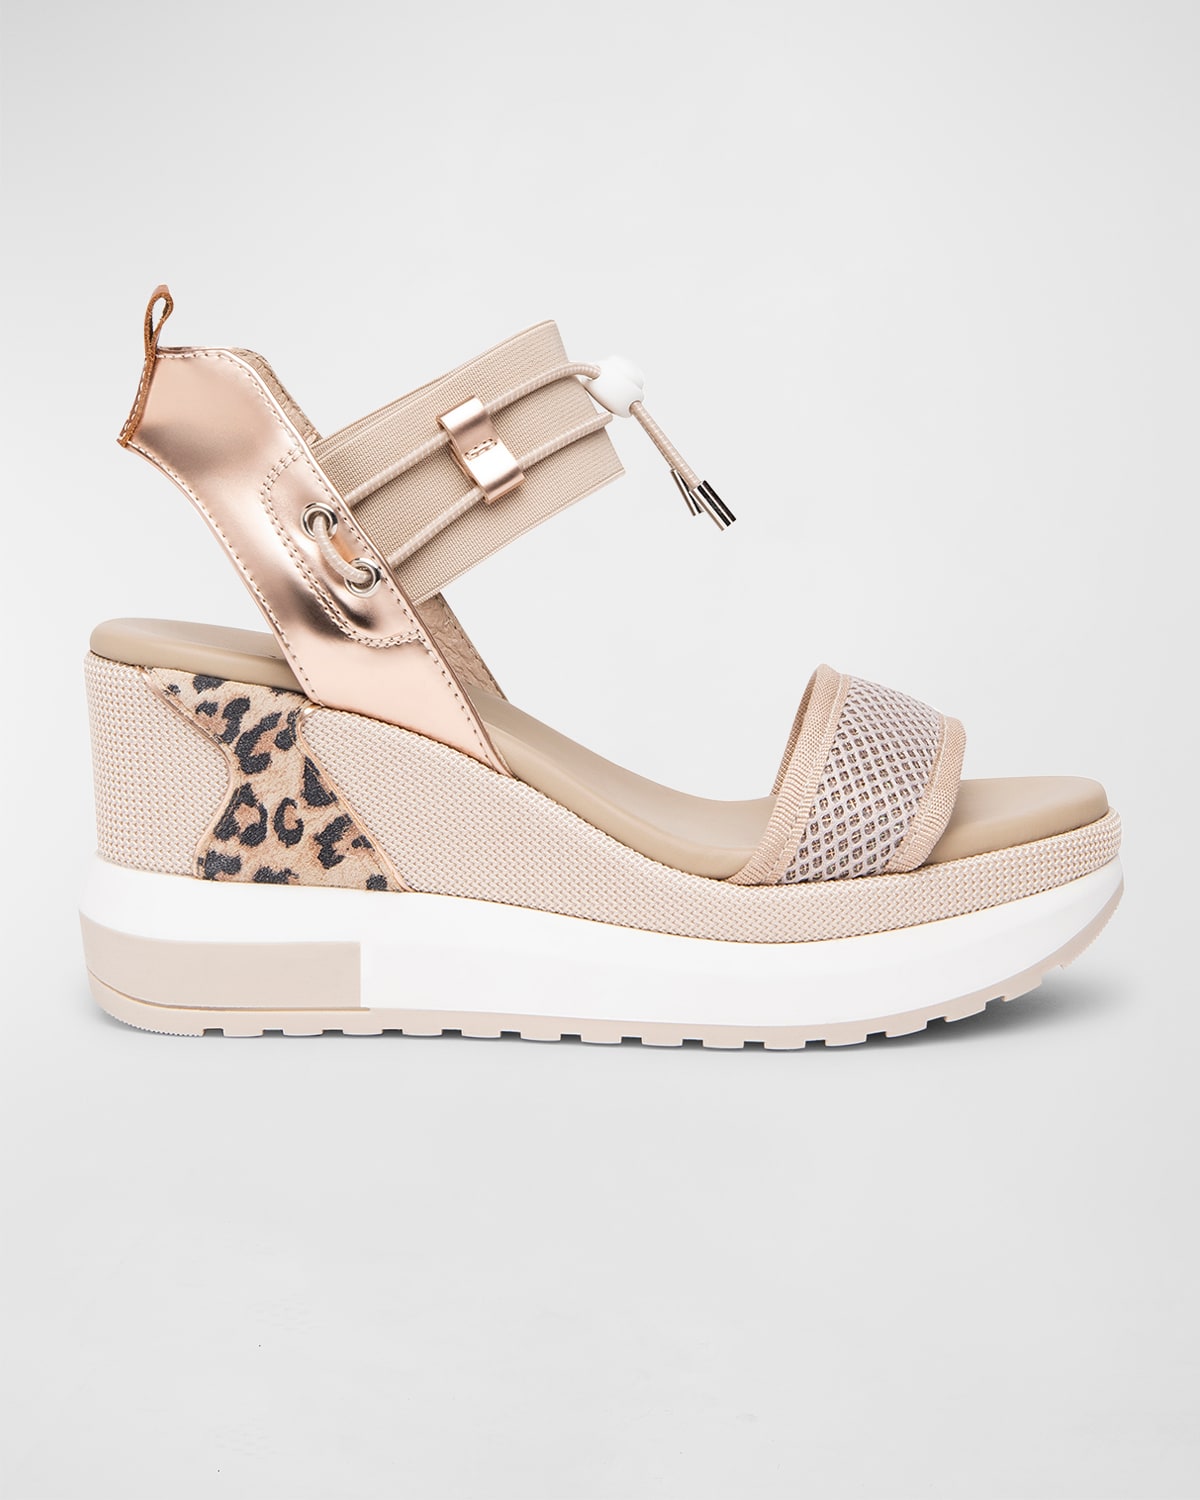 Shop Nerogiardini Platform Wedge Sandals With Bungee Detail In Taupe / Rose Gold